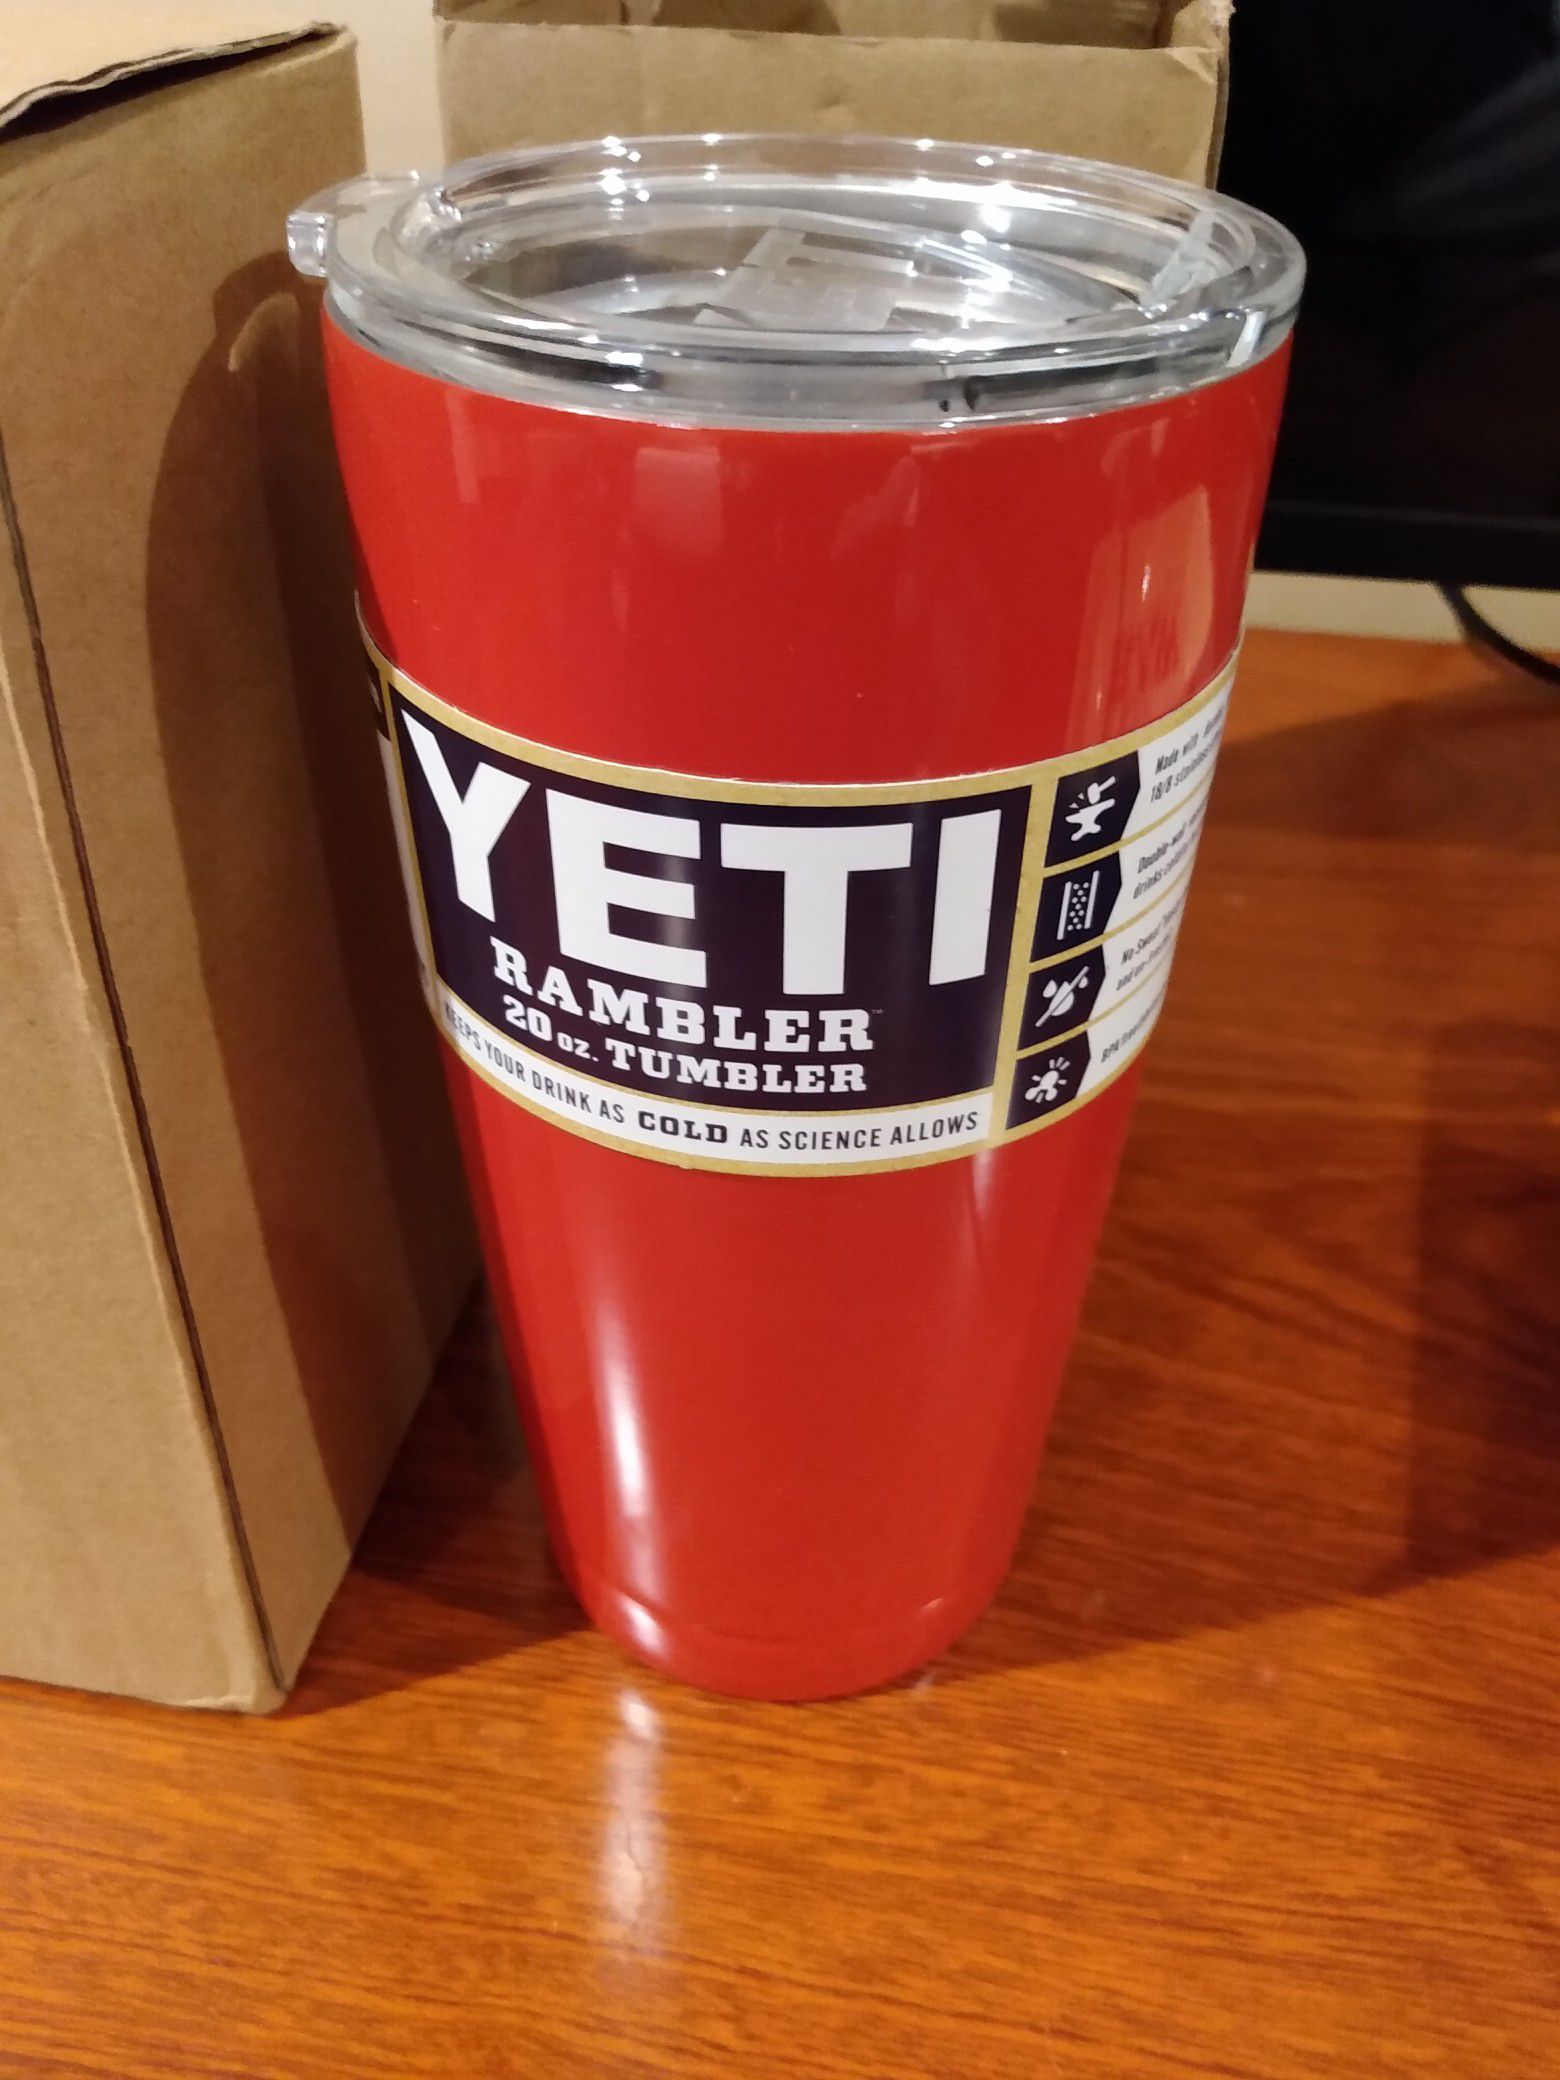 Yeti Coolers Custom Stainless Steel 20 Ounce Rambler Tumbler with Lid - BRICK RED - Keeps Your Drink Hot or Cold for Hours